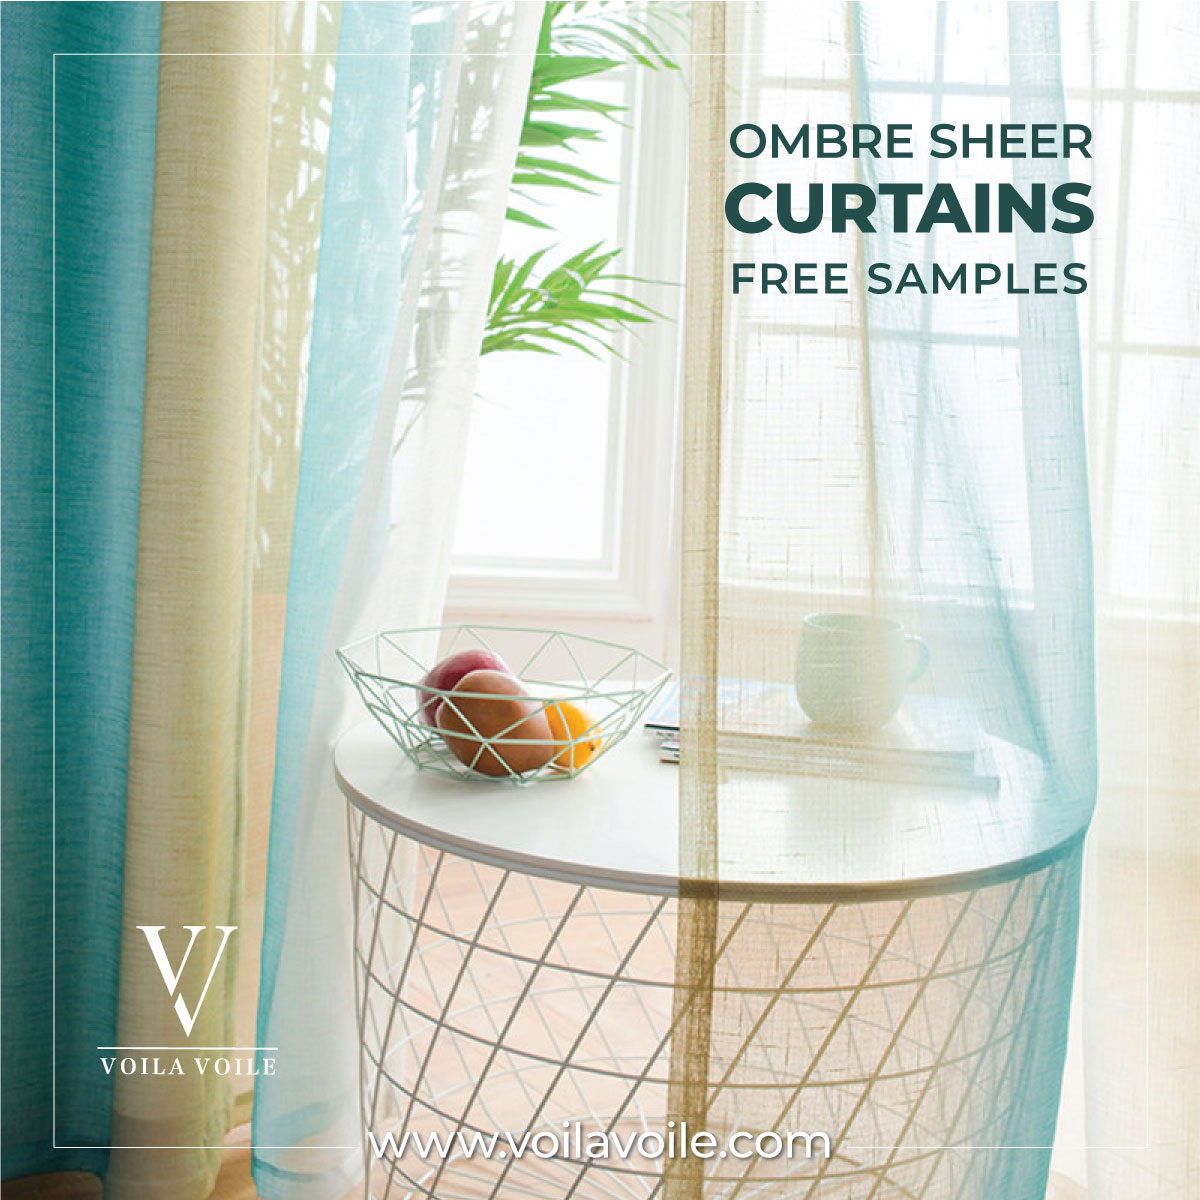 Ombre Sheer Curtains